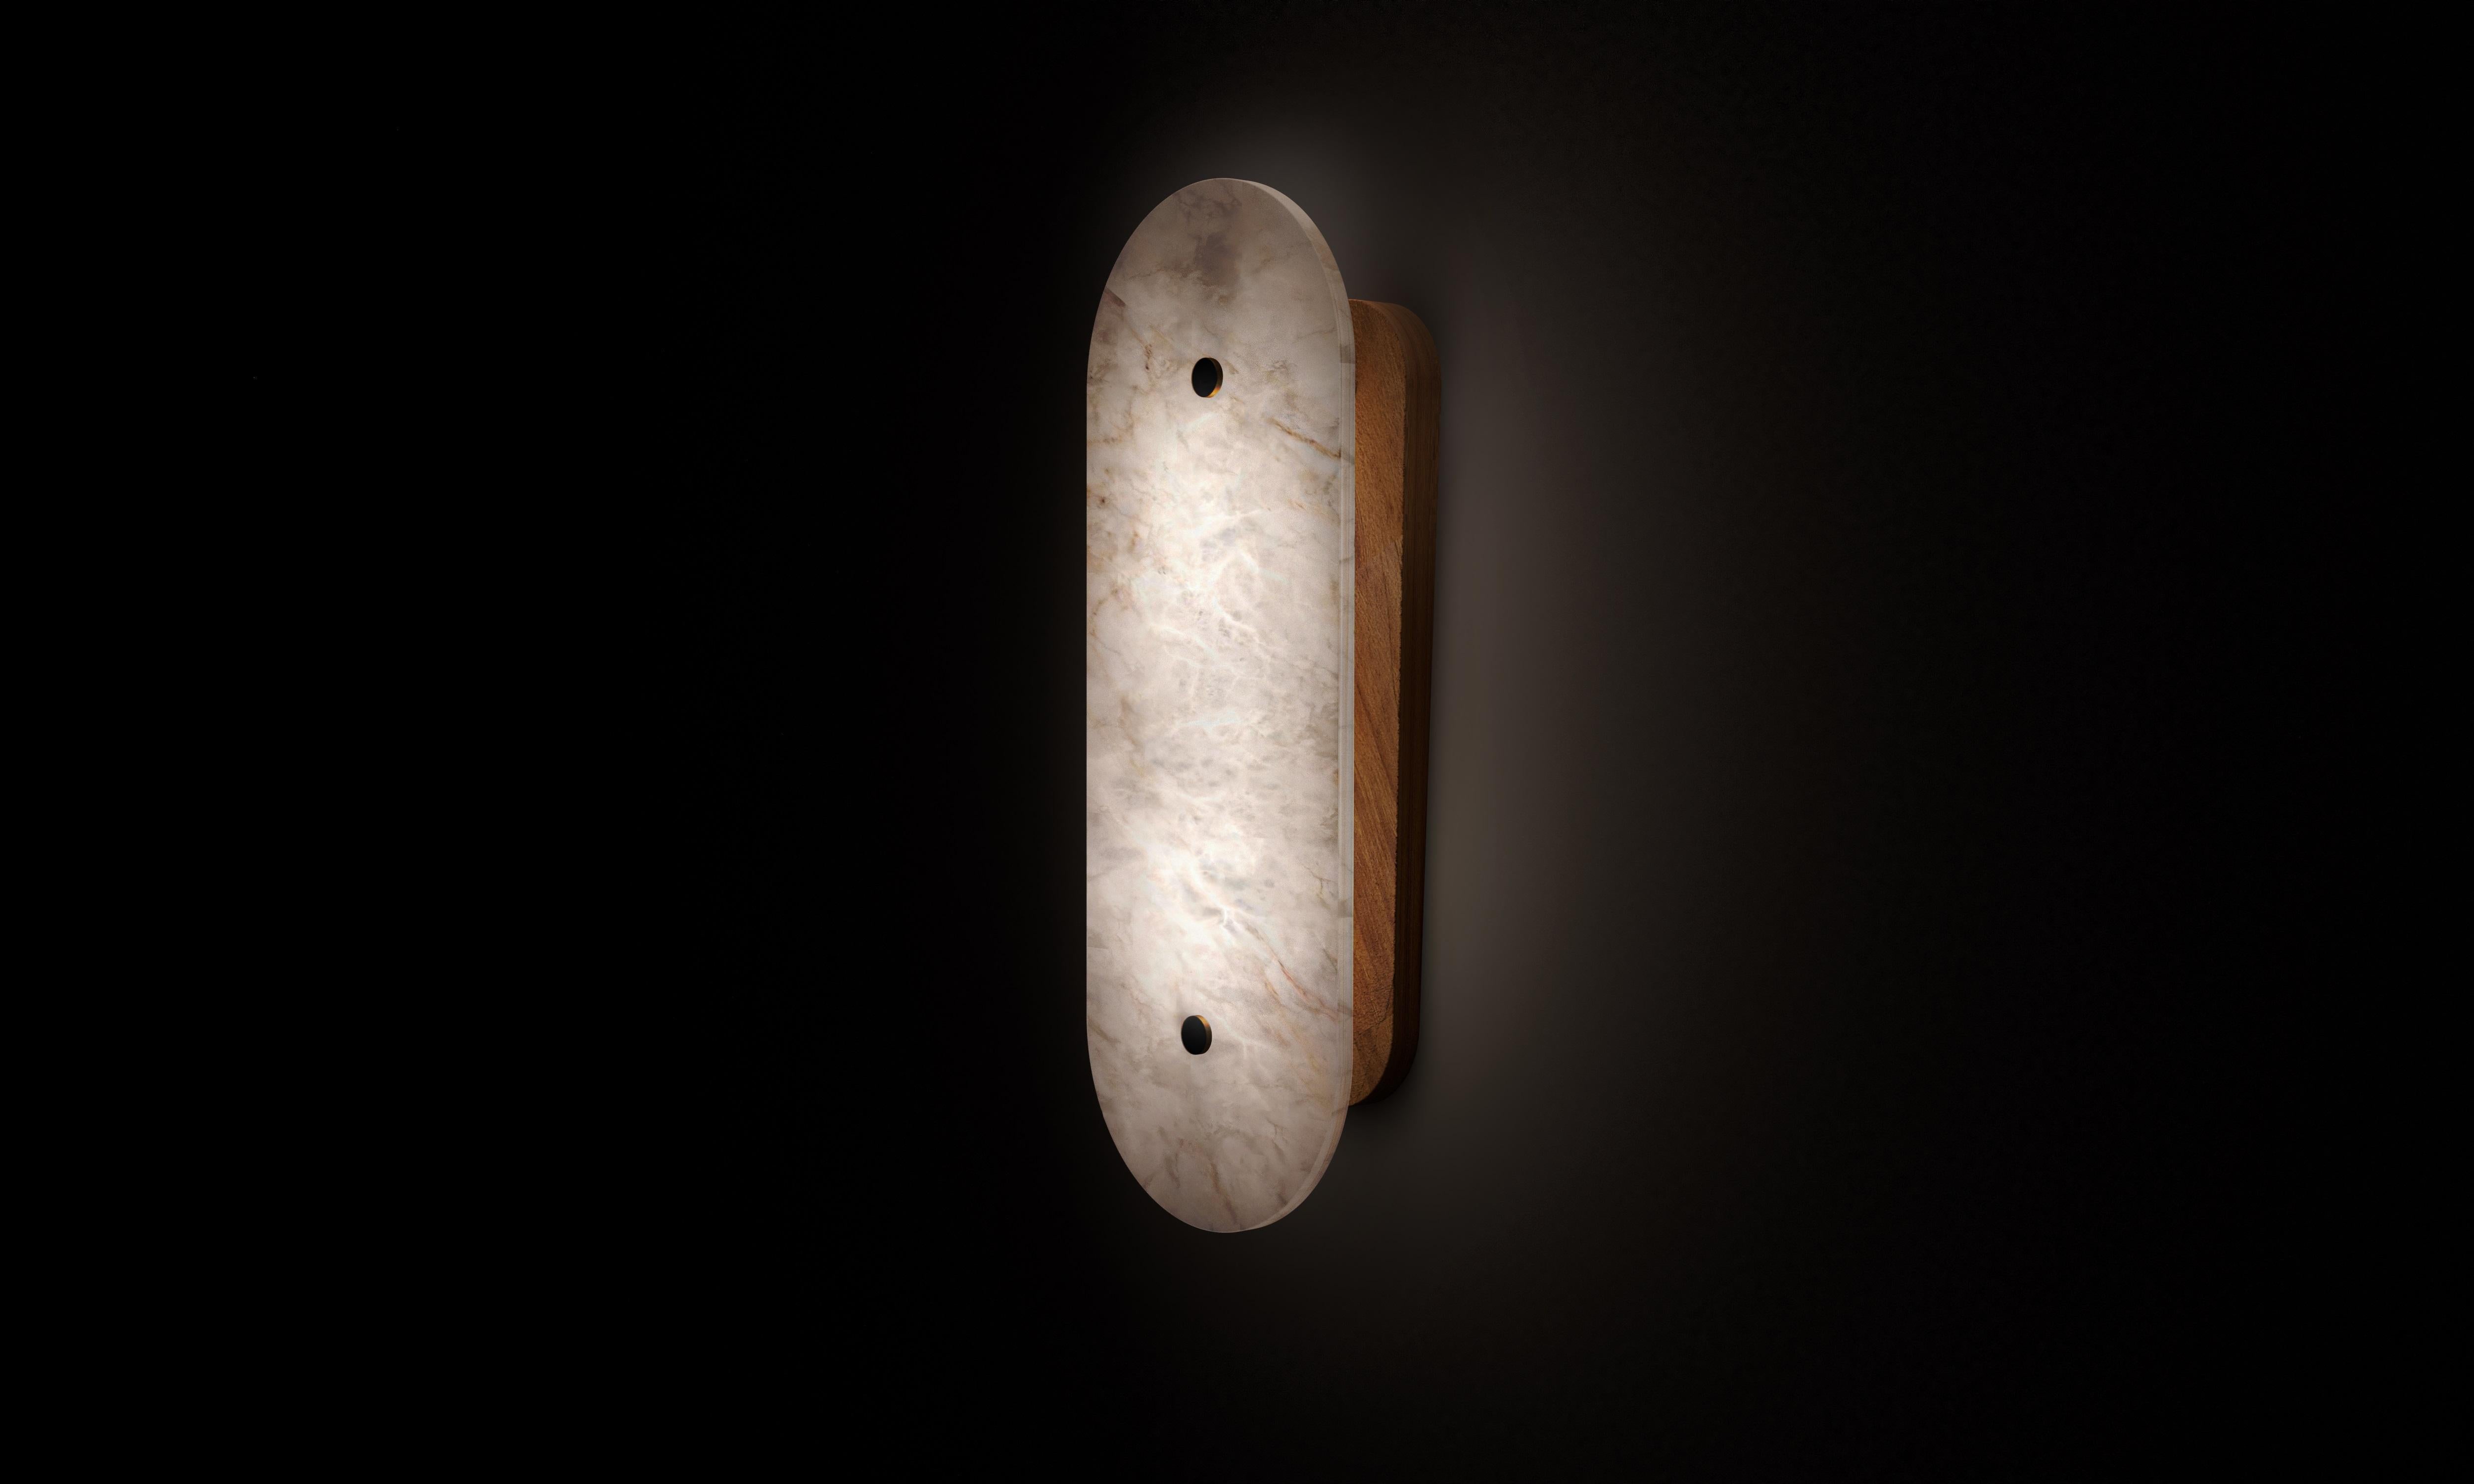 Small Hikari Wall Lamp by Alabastro Italiano
Dimensions: D 9.3 x W 15 x H 40 cm.
Materials: White alabaster, Iroko wood.
Available in other finishes and sizes.

All our lamps can be wired according to each country. If sold to the USA it will be